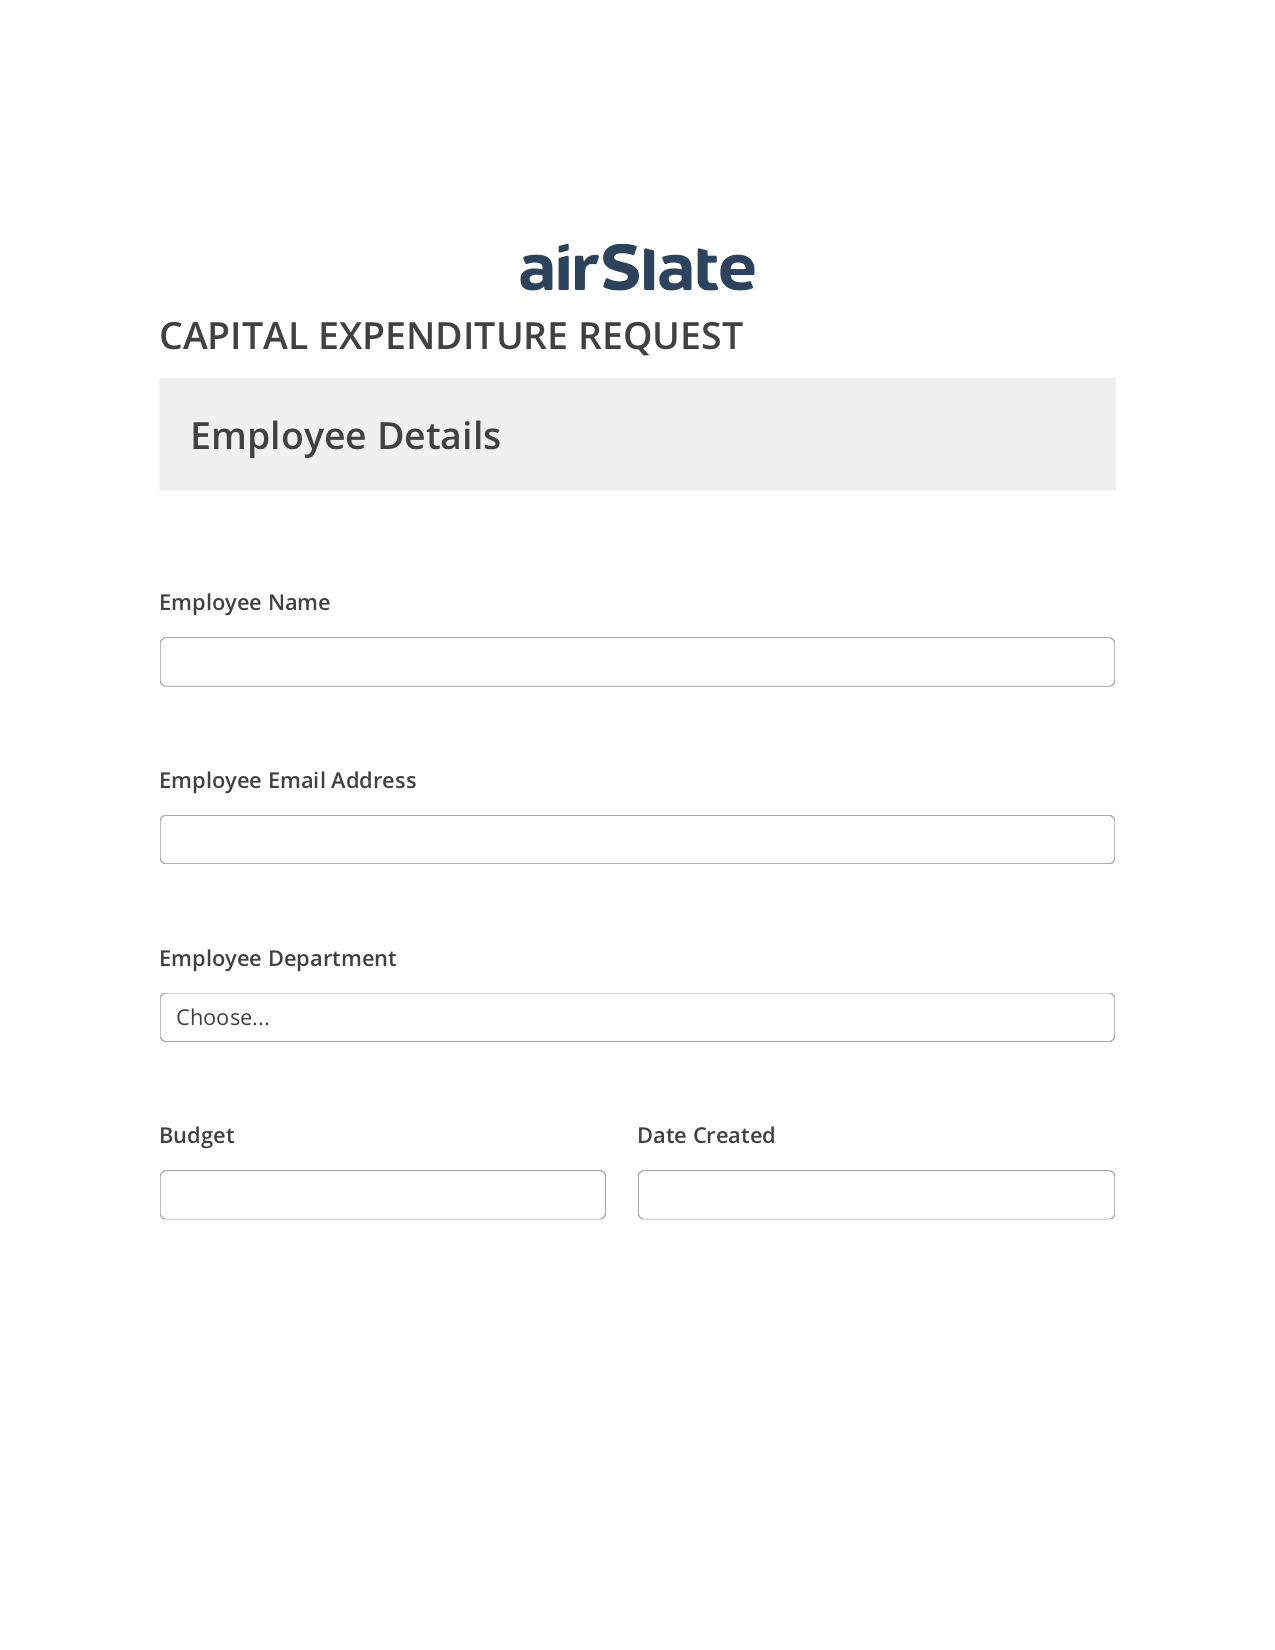 Capital Expenditure Request Approval Workflow Pre-fill Dropdowns from Smartsheet Bot, Update MS Dynamics 365 Record Bot, Archive to SharePoint Folder Bot